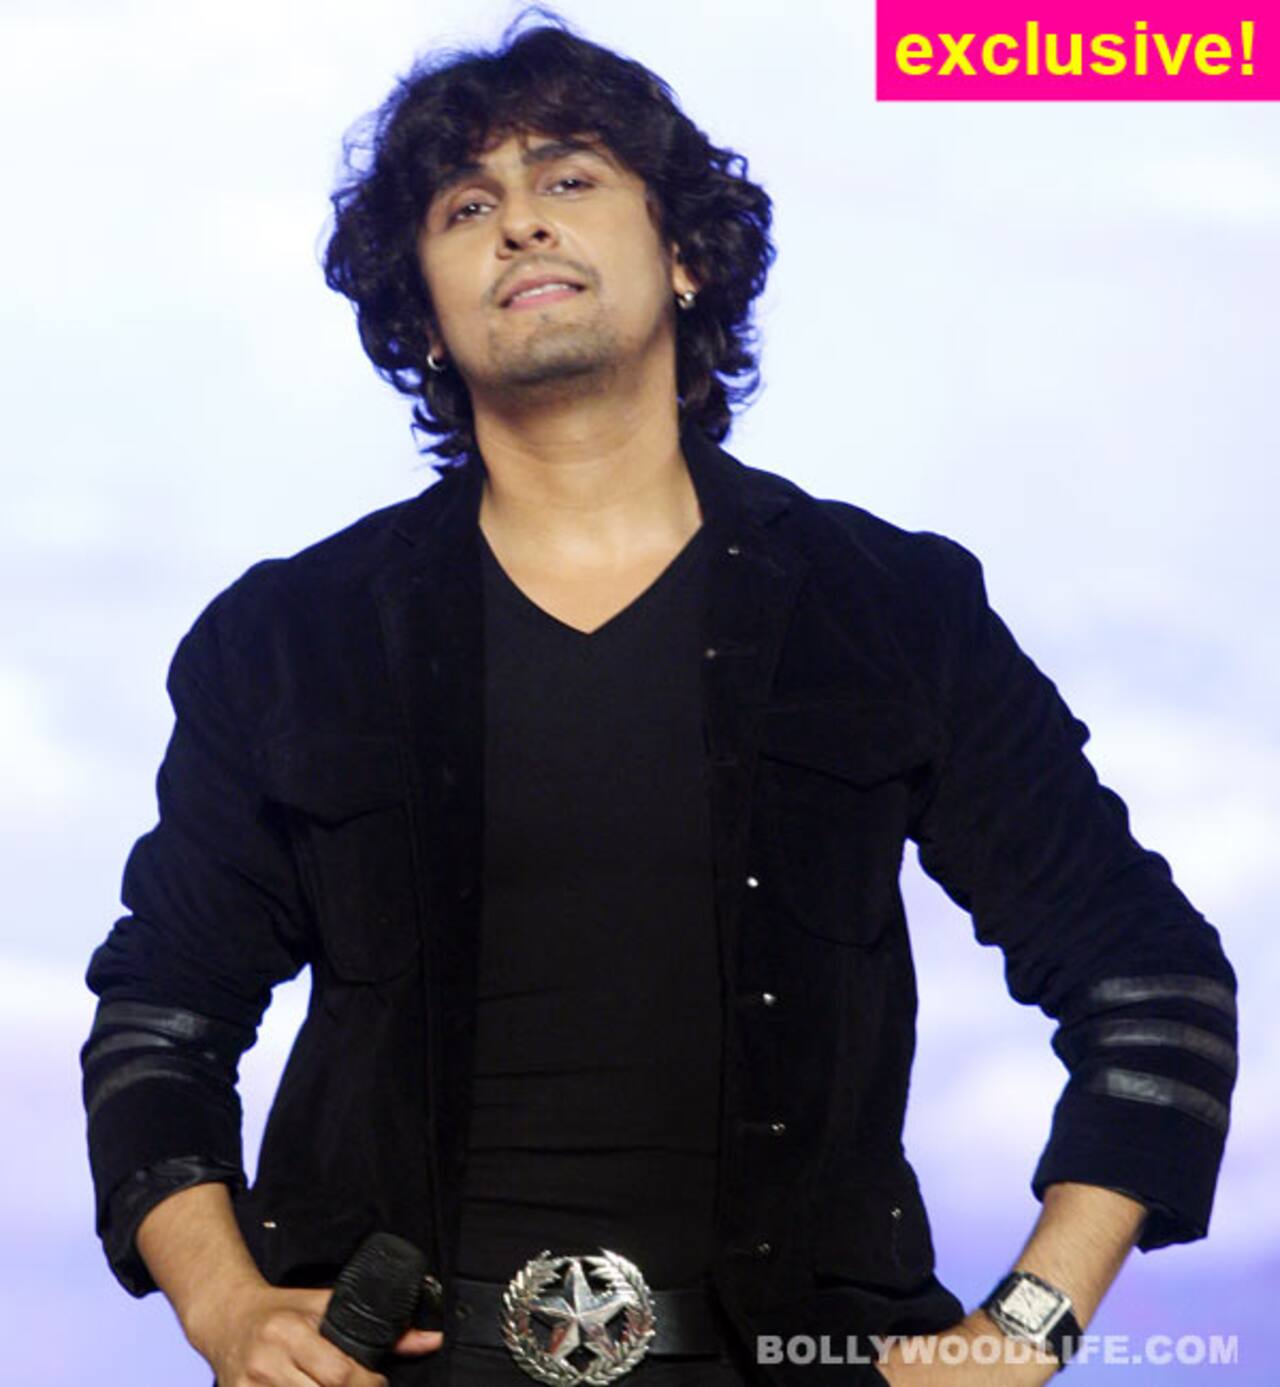 Sonu Nigam: I know what Neha Dhupia is doing, but have no clue about what  Sunidhi Chauhan is up to! - Bollywood News & Gossip, Movie Reviews,  Trailers & Videos at 